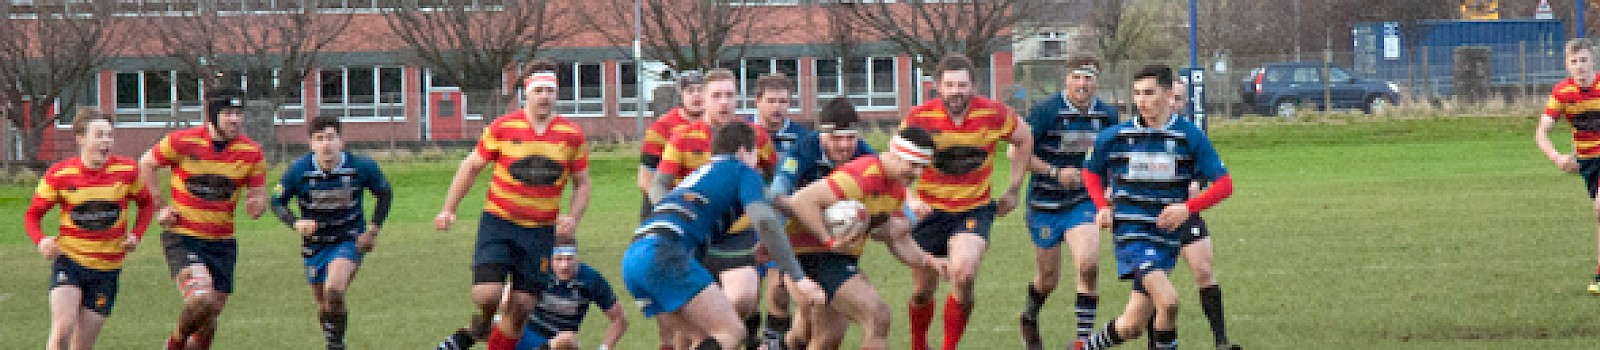 West lose at Ardrossan